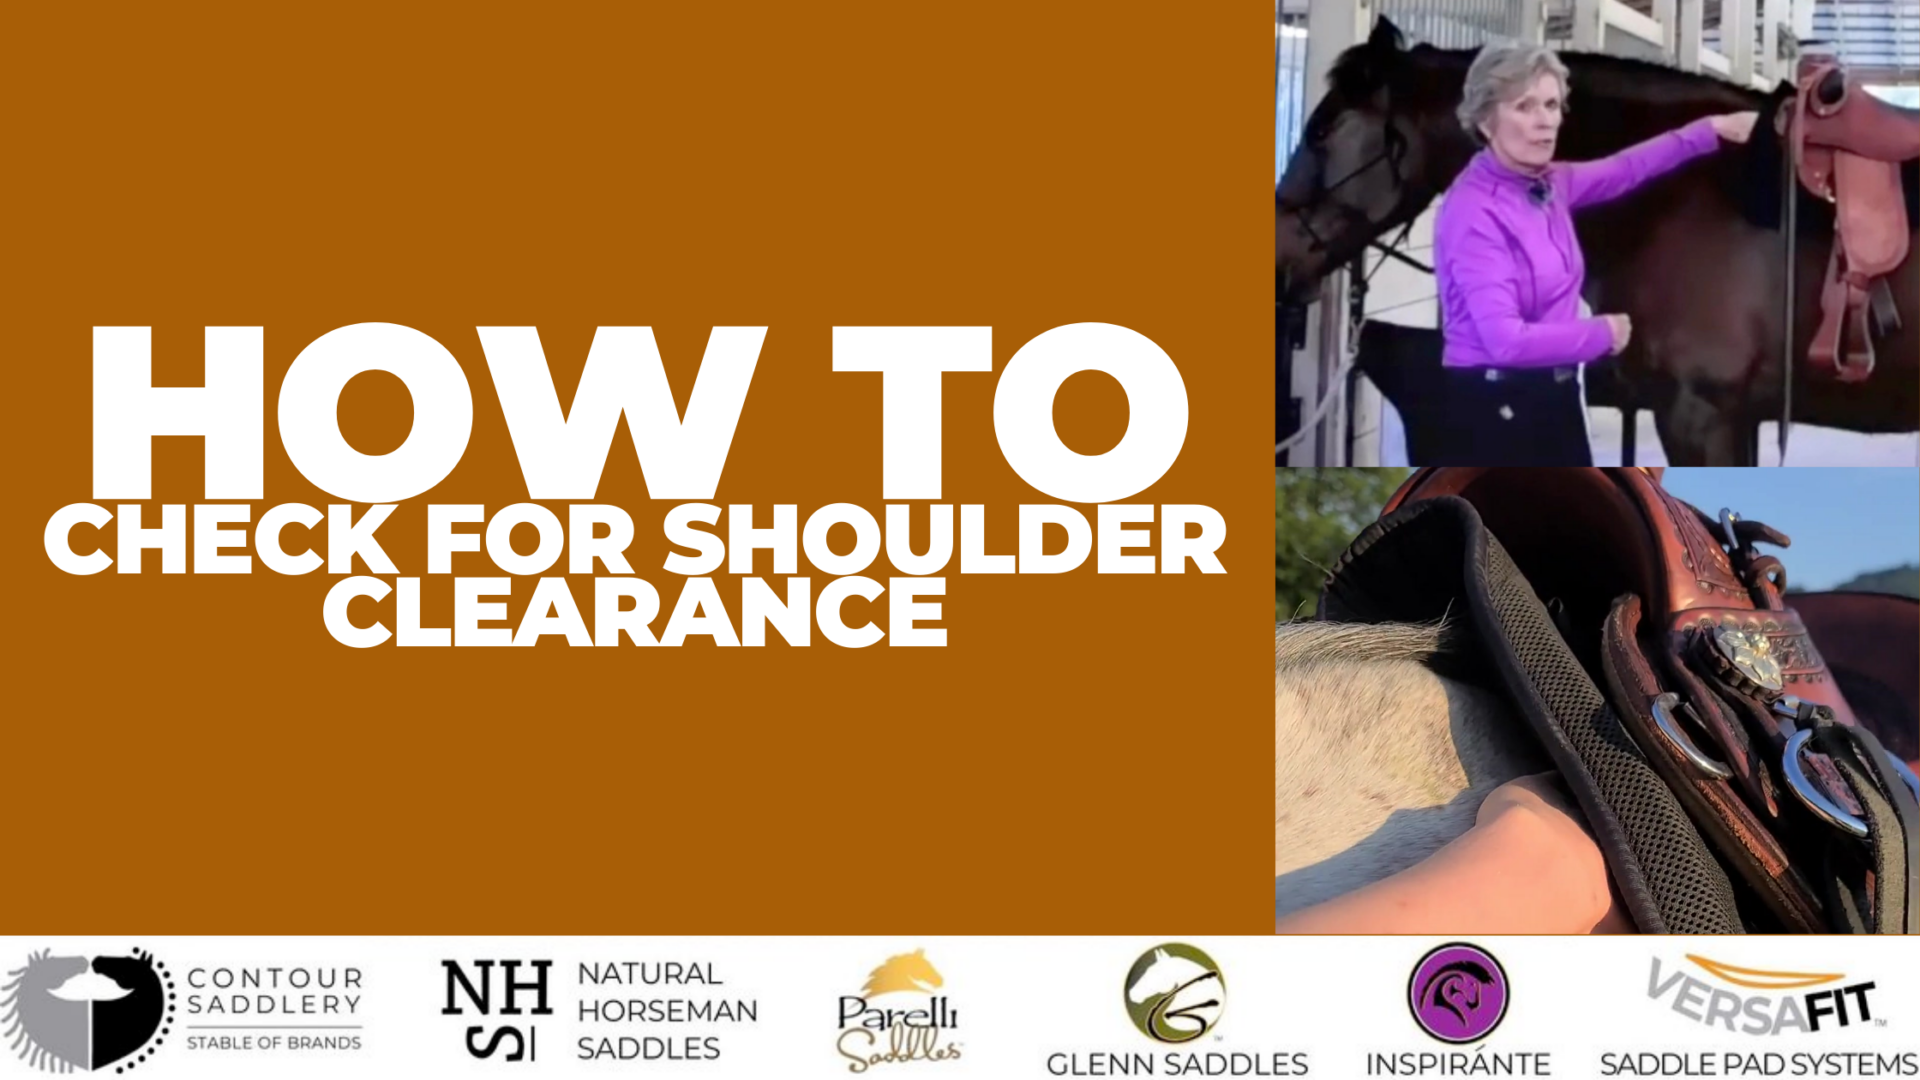 How to check your horse's shoulder clearance - Contour Saddlery